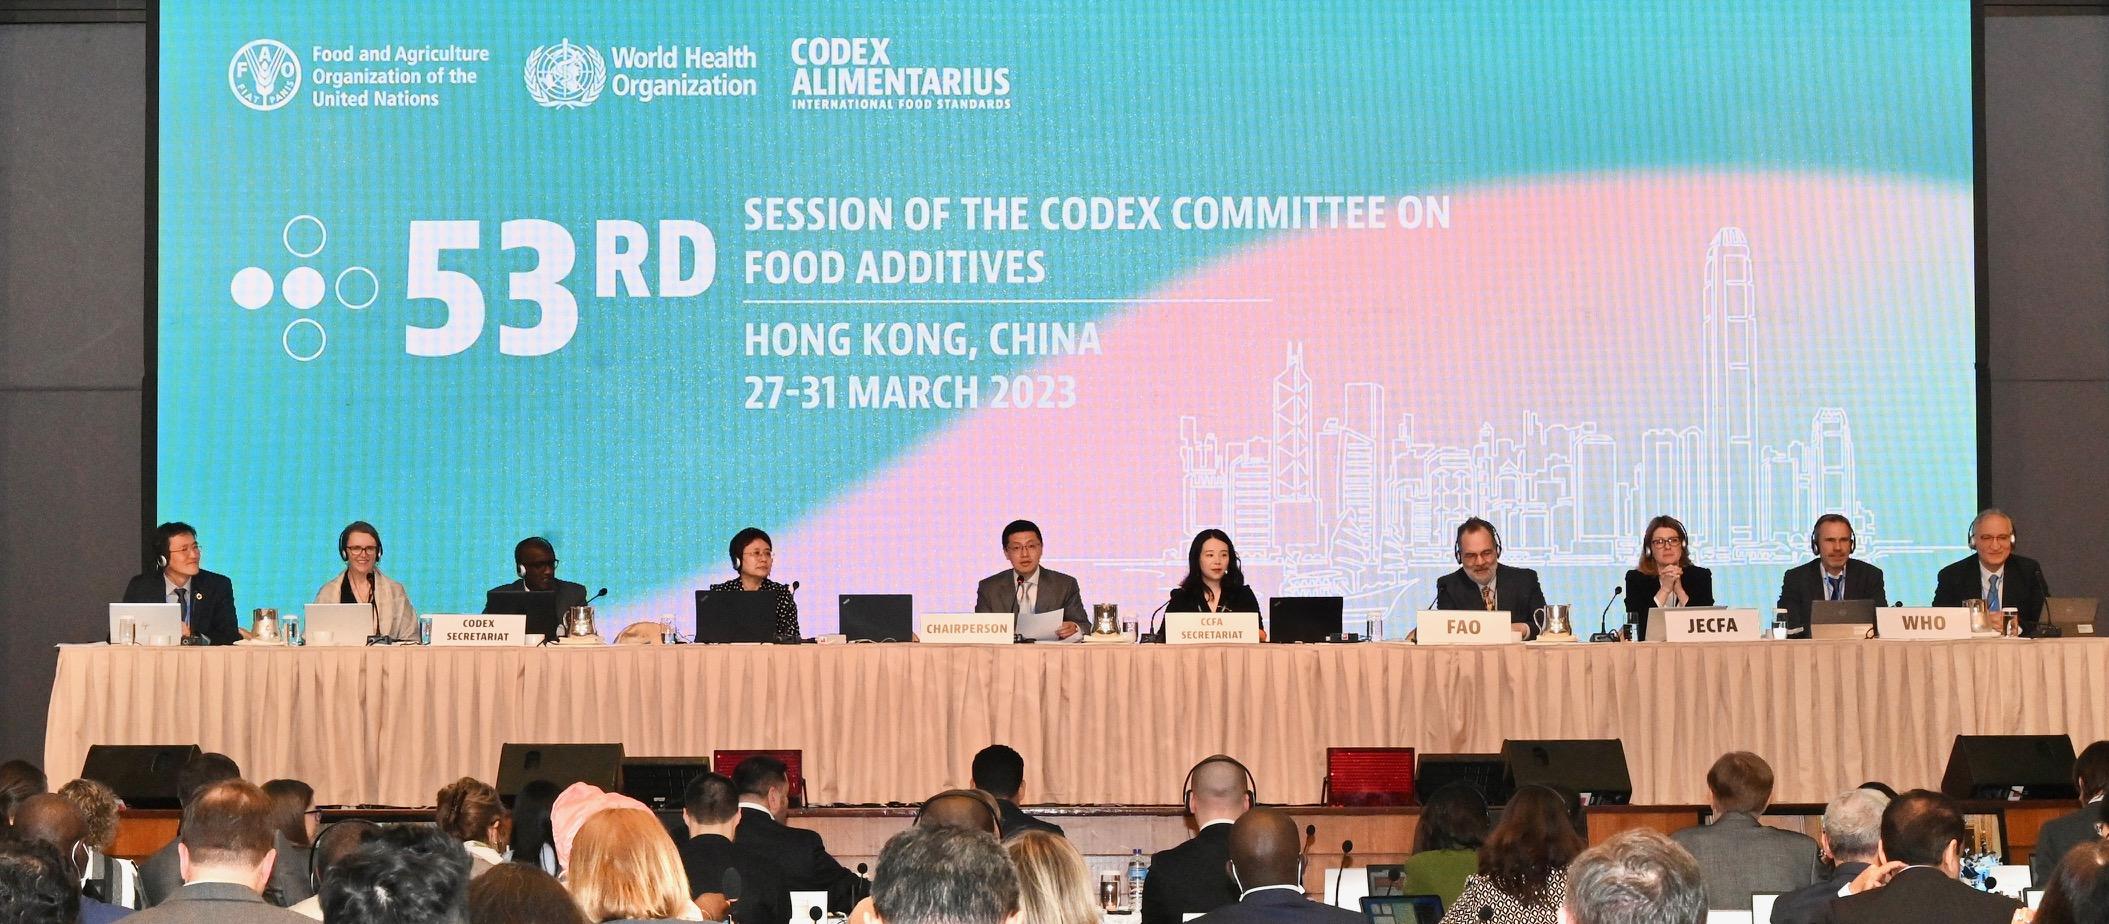 The 53rd Session of the Codex Committee on Food Additives (CCFA) opened in Hong Kong today (March 27). It is the second time for the CCFA meeting to be held in Hong Kong since China started serving as the host country of the CCFA in 2006. The previous CCFA meeting held in Hong Kong was the 46th Session in 2014.